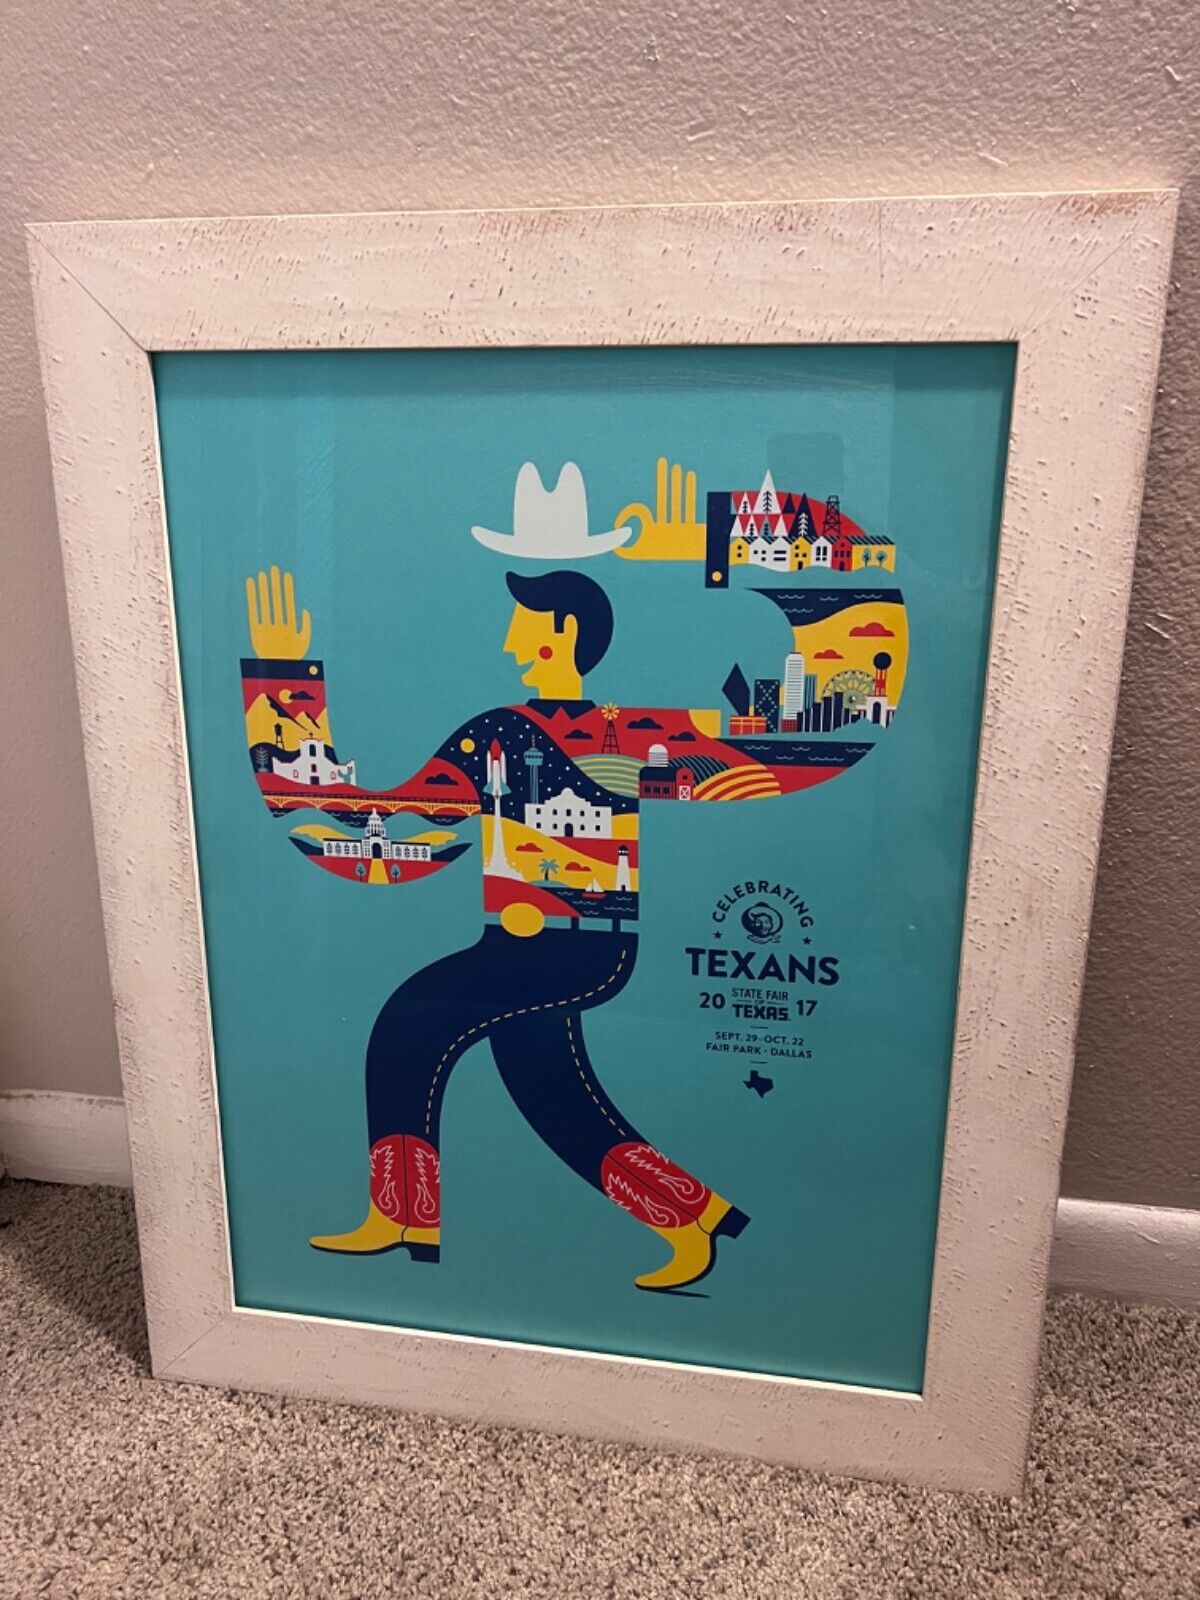 Texas State Fair 2017 Collectible Poster Professionally Framed